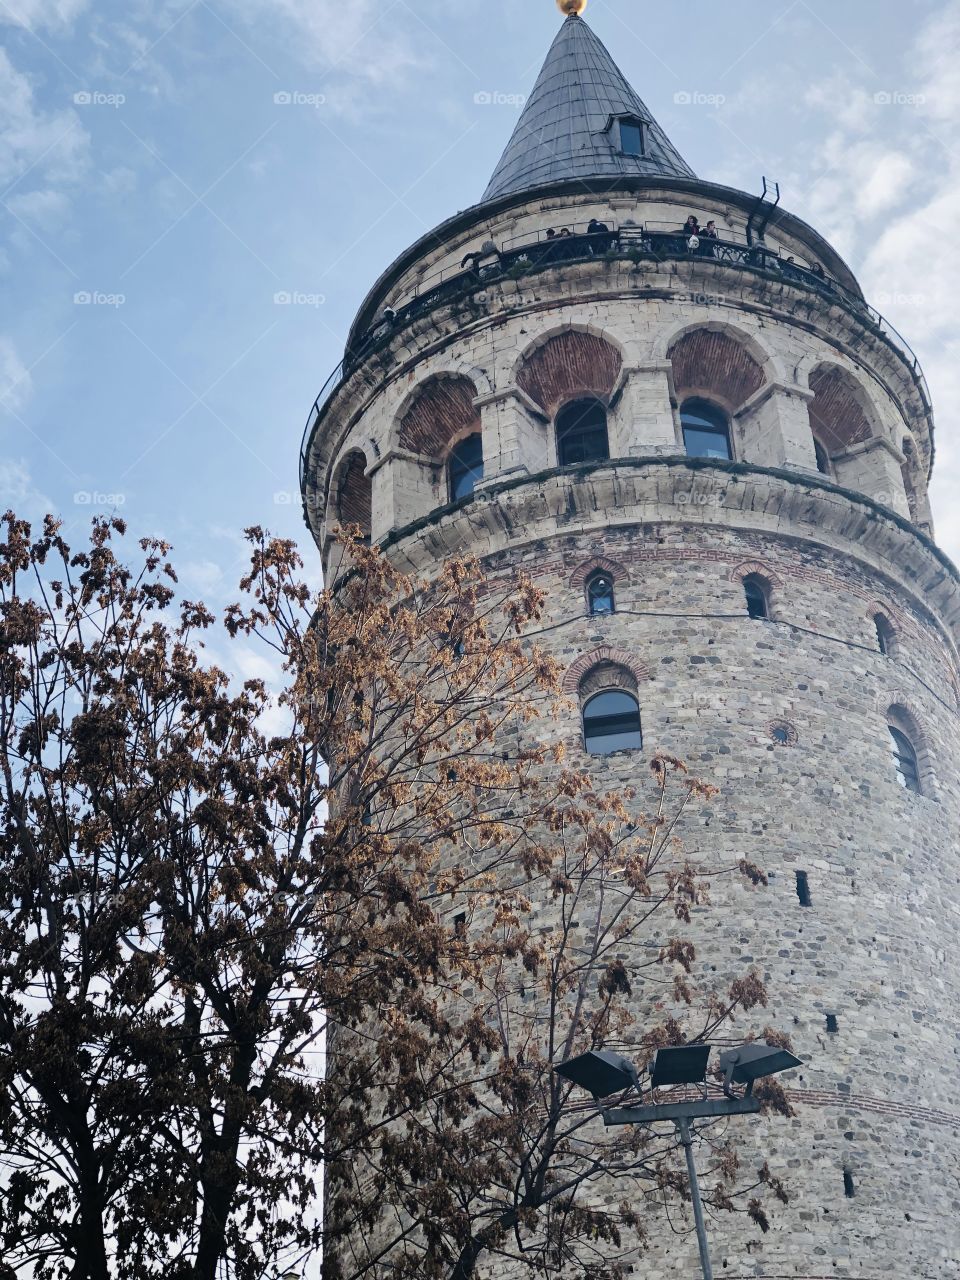 Historical places in Istanbul 